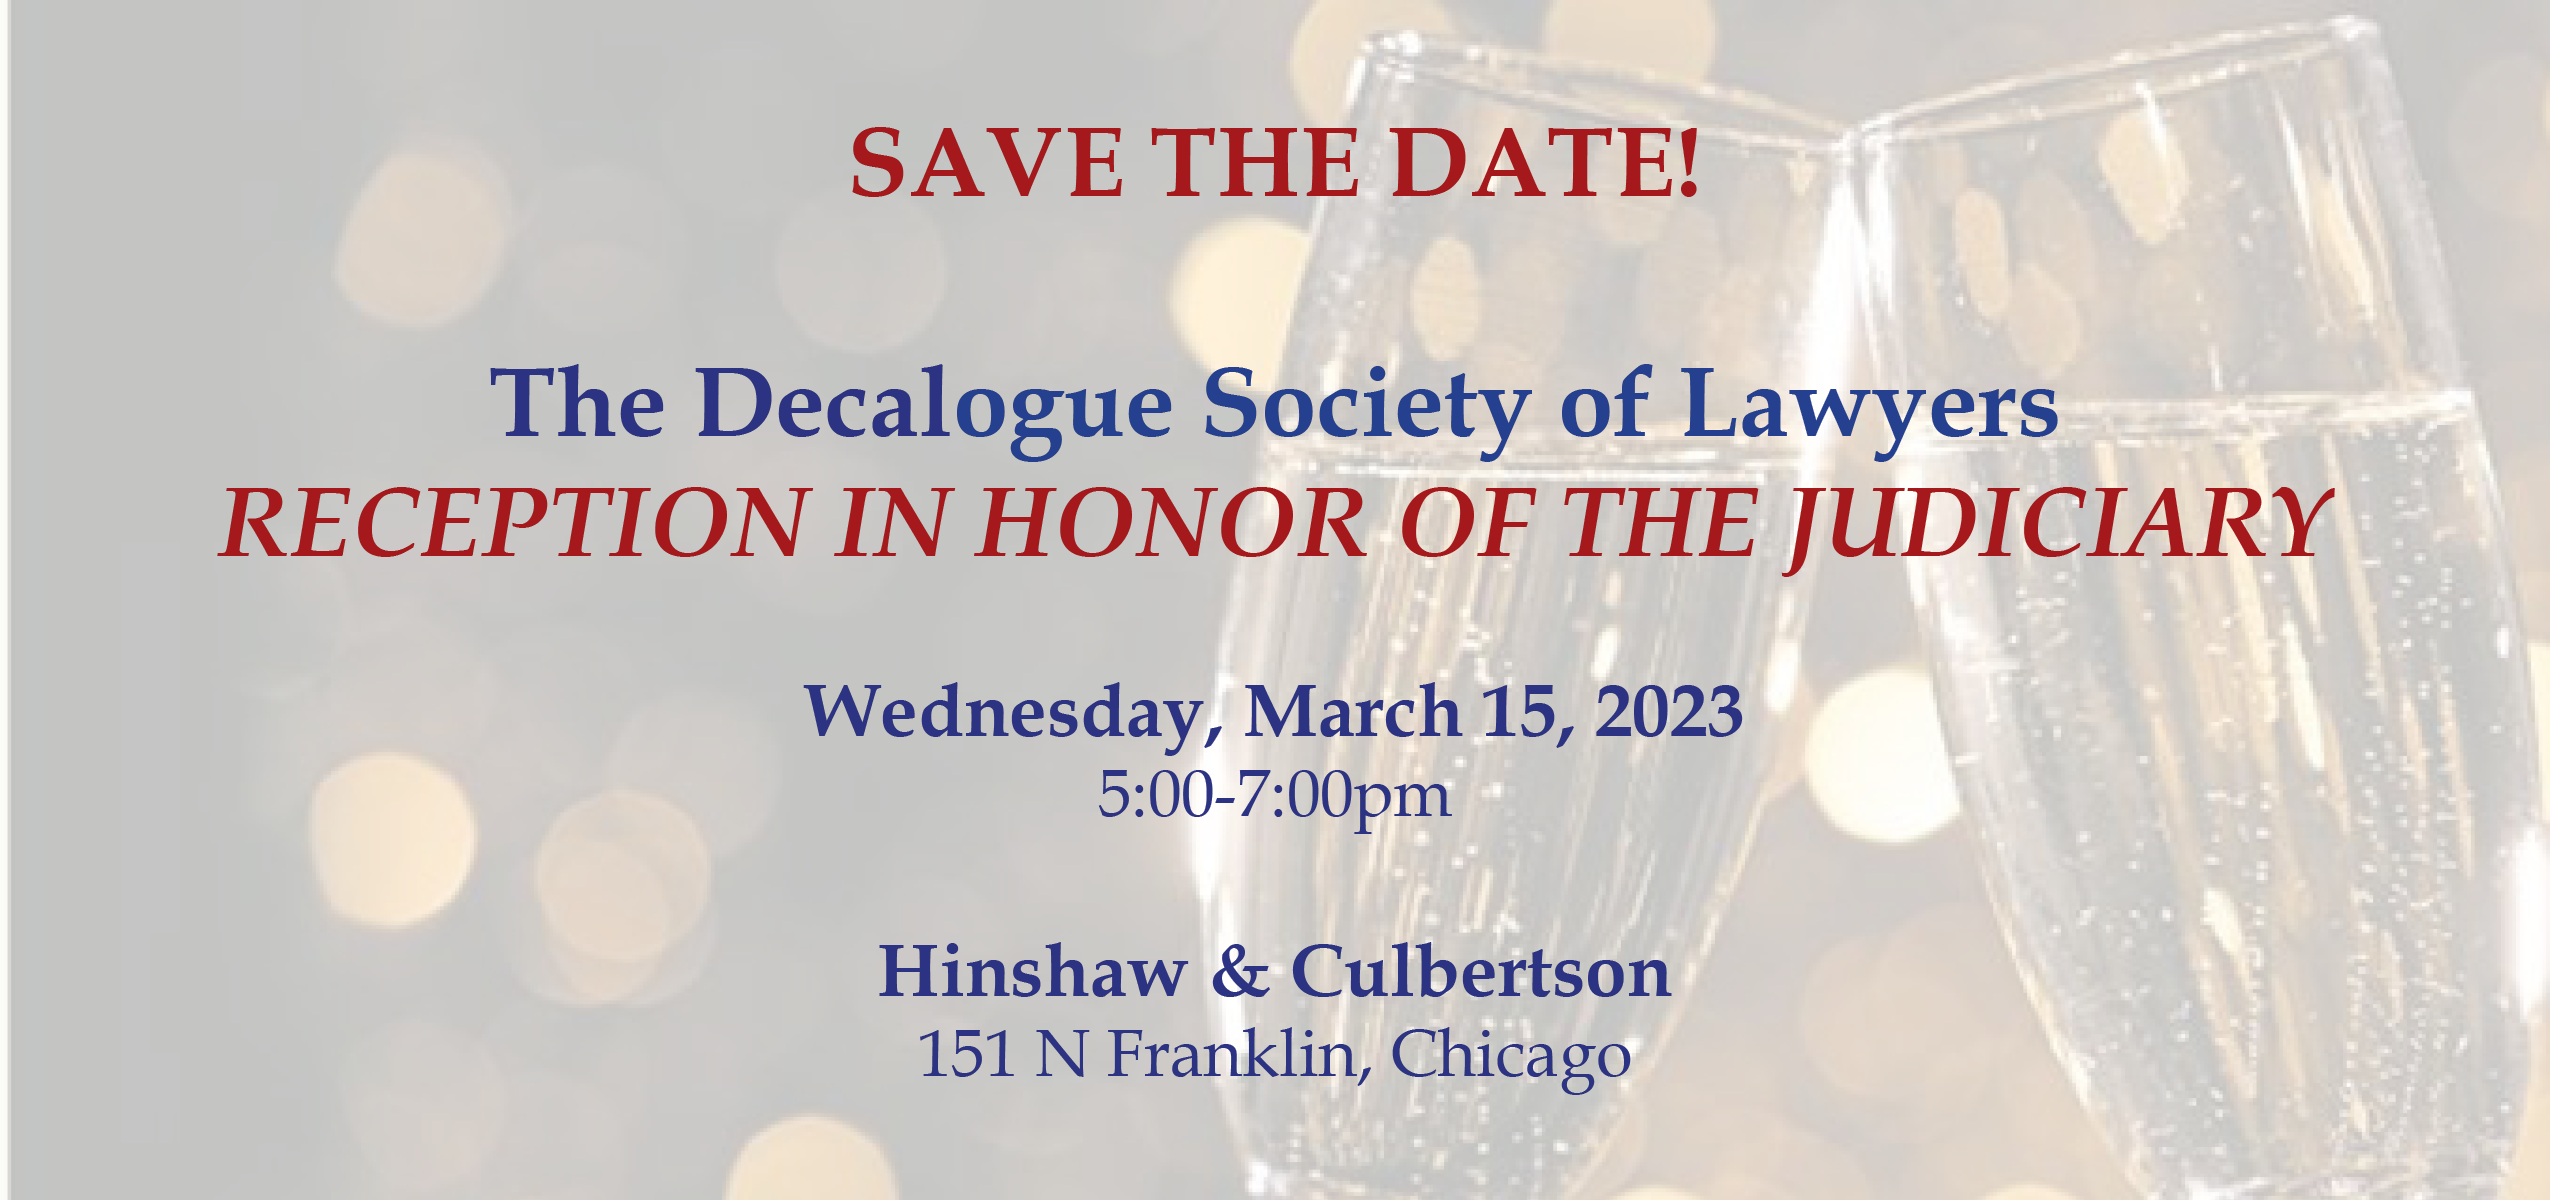 2023 Judicial Reception Save the Date